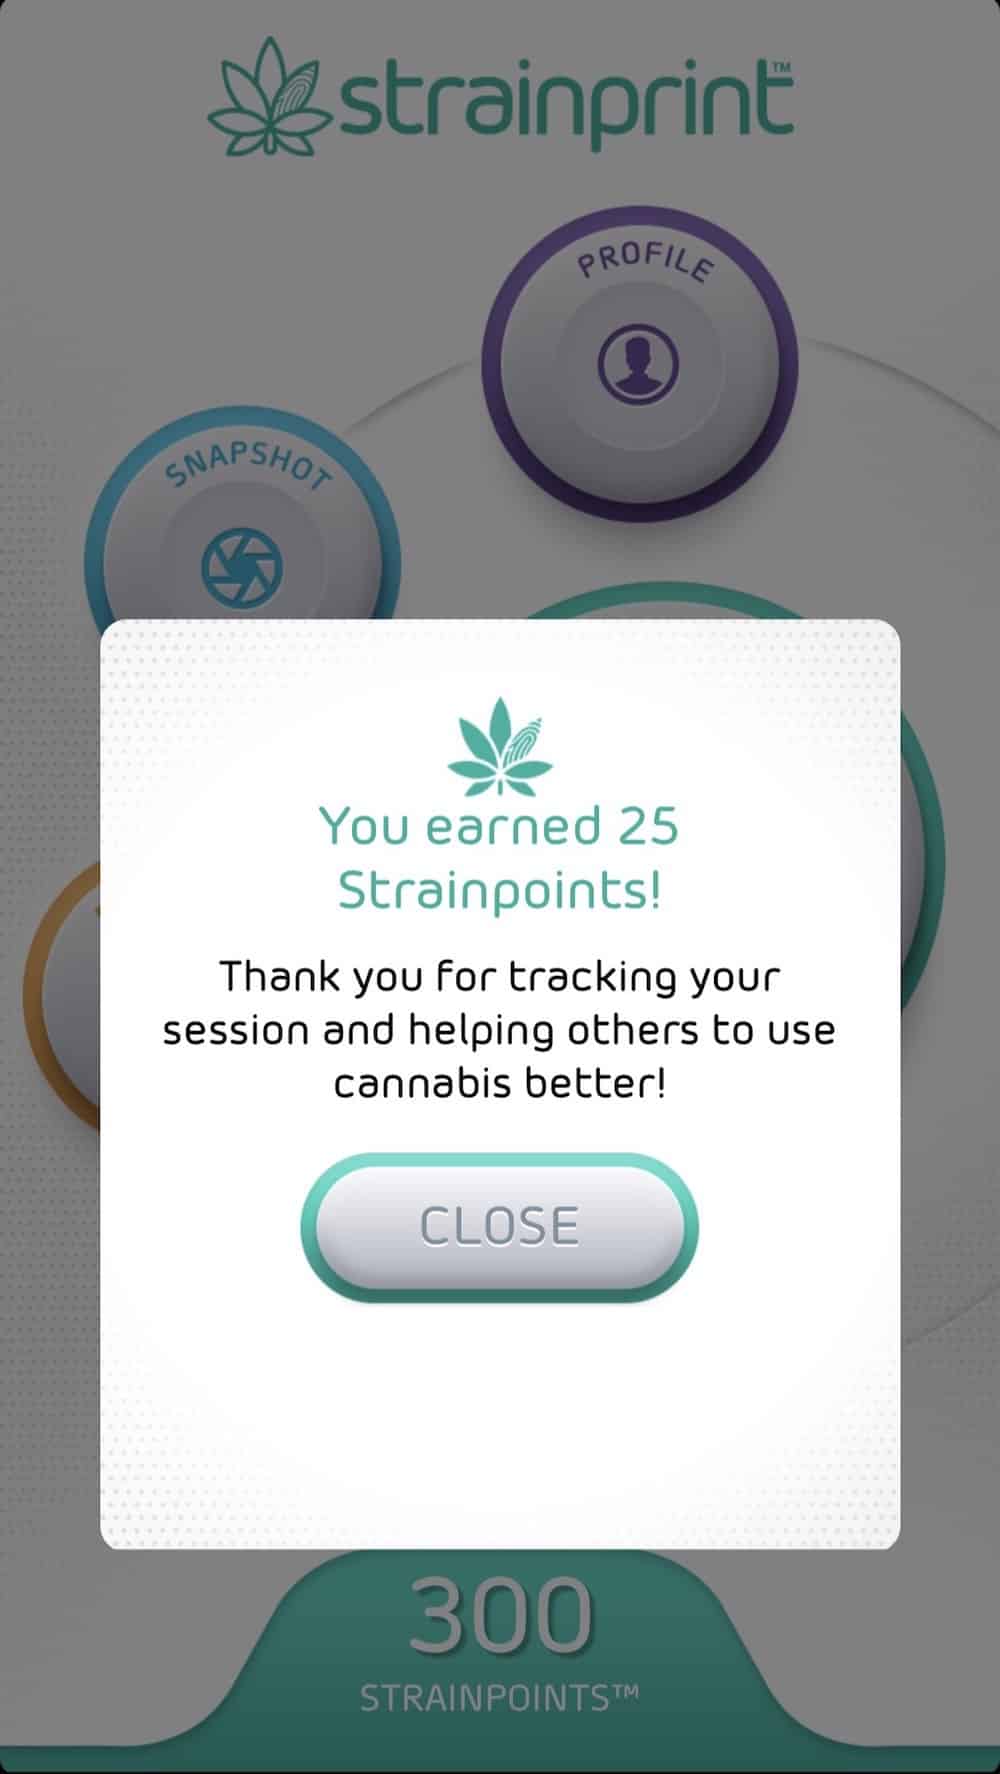 Strainprint: The App that Can Actually Help You Find Your Perfect Strain